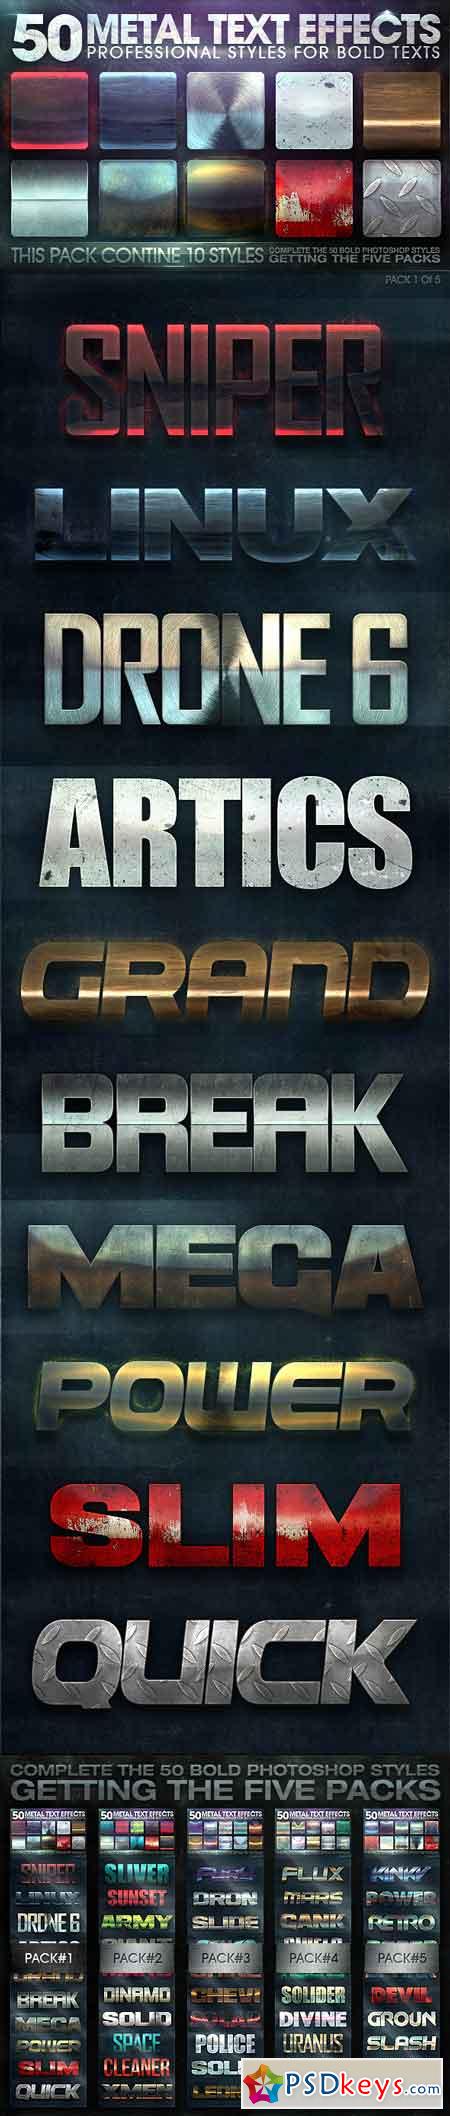 50 Metal Text Effects 1 of 5 10678899